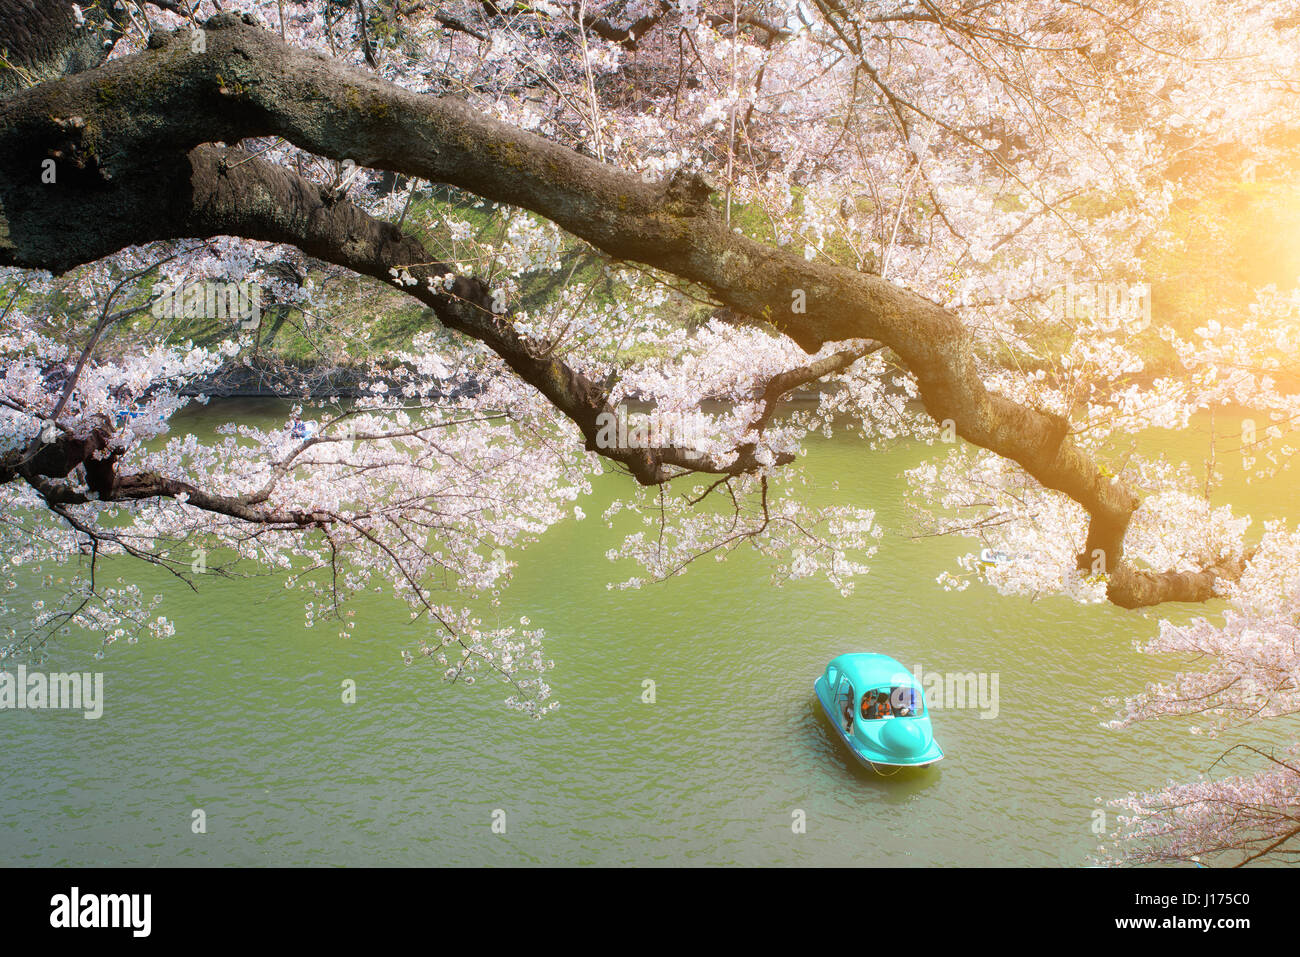 Tokyo Cherry blossom, Japan Sakura blossom spread over the boats are paddled with full bloom on the canal in Chidorigafuchi park at Tokyo, Japan Stock Photo